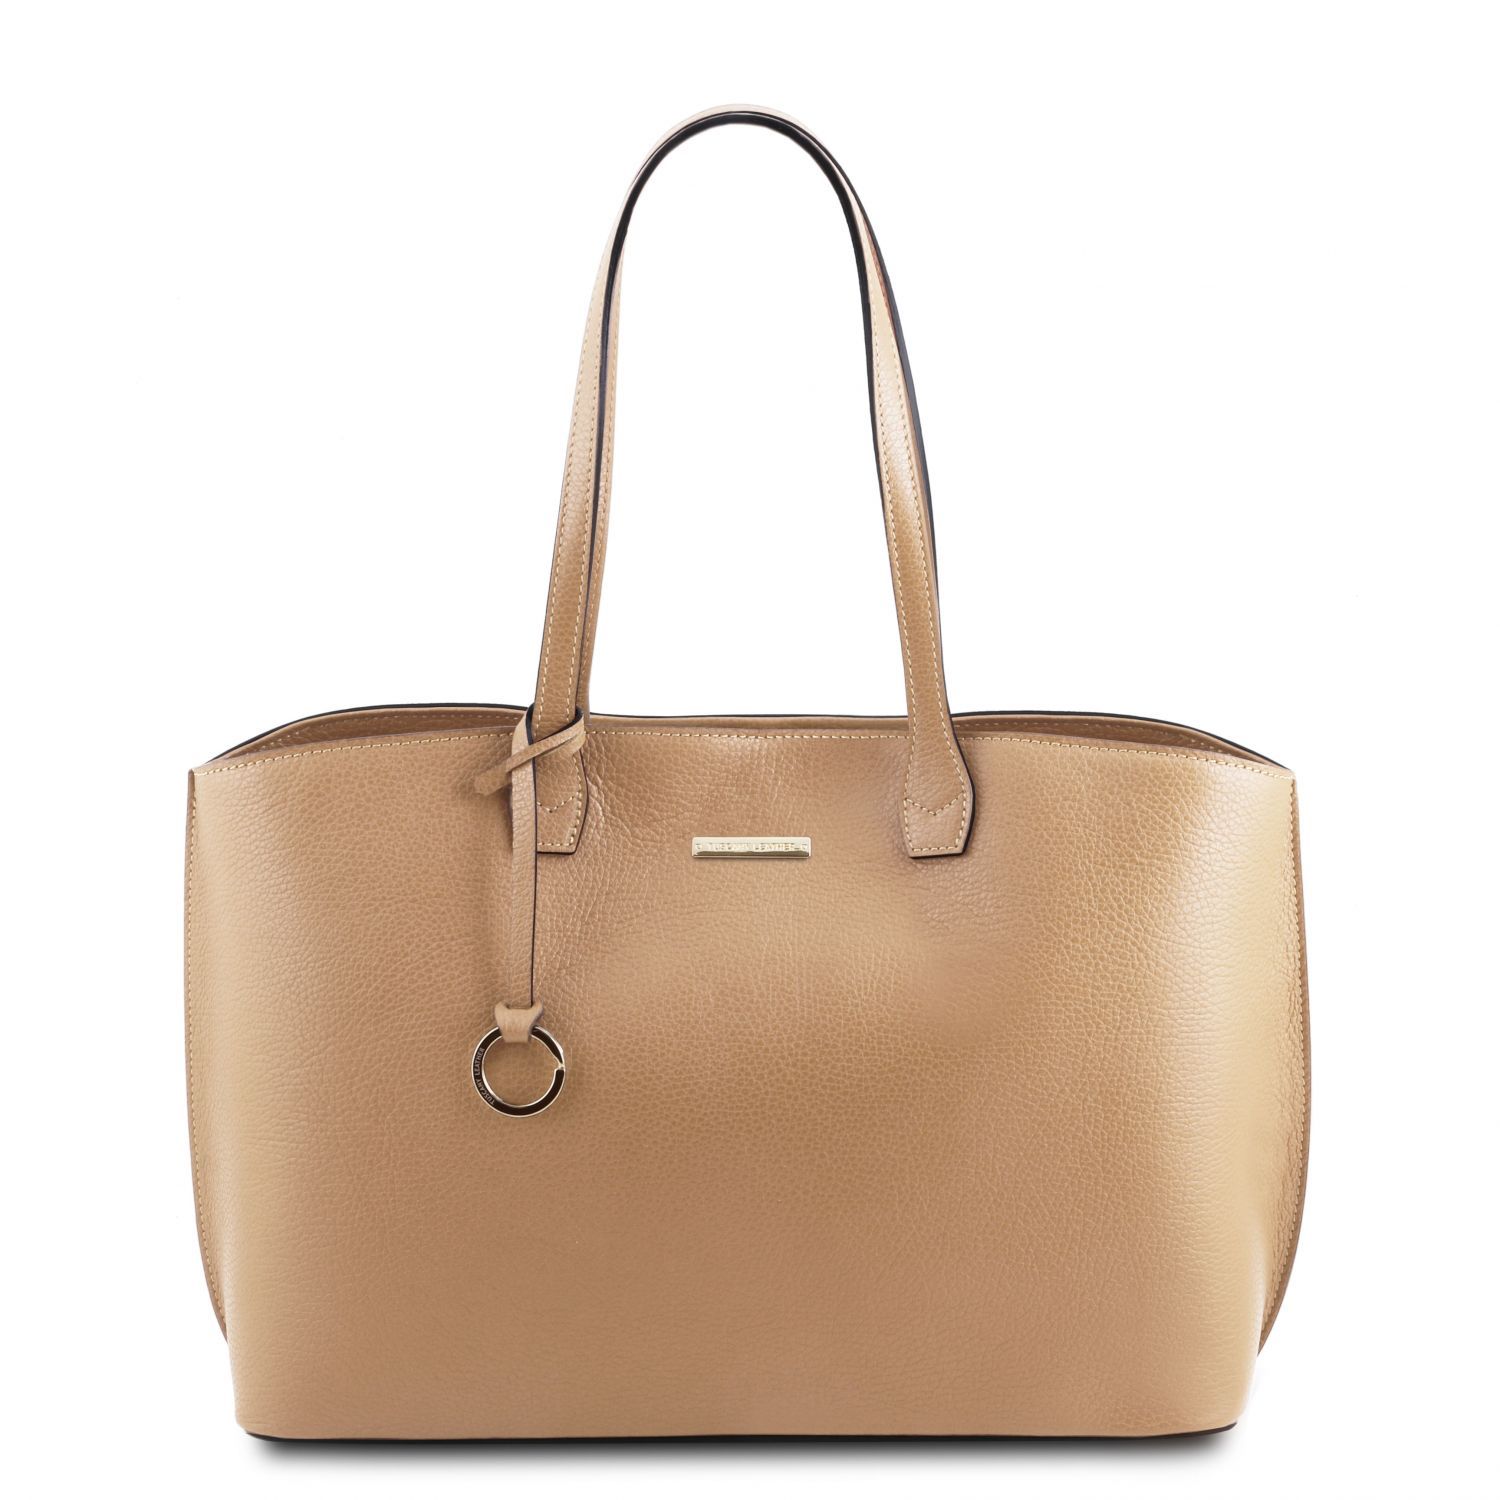 TL Bag Soft leather tote bag Champagne TL141828